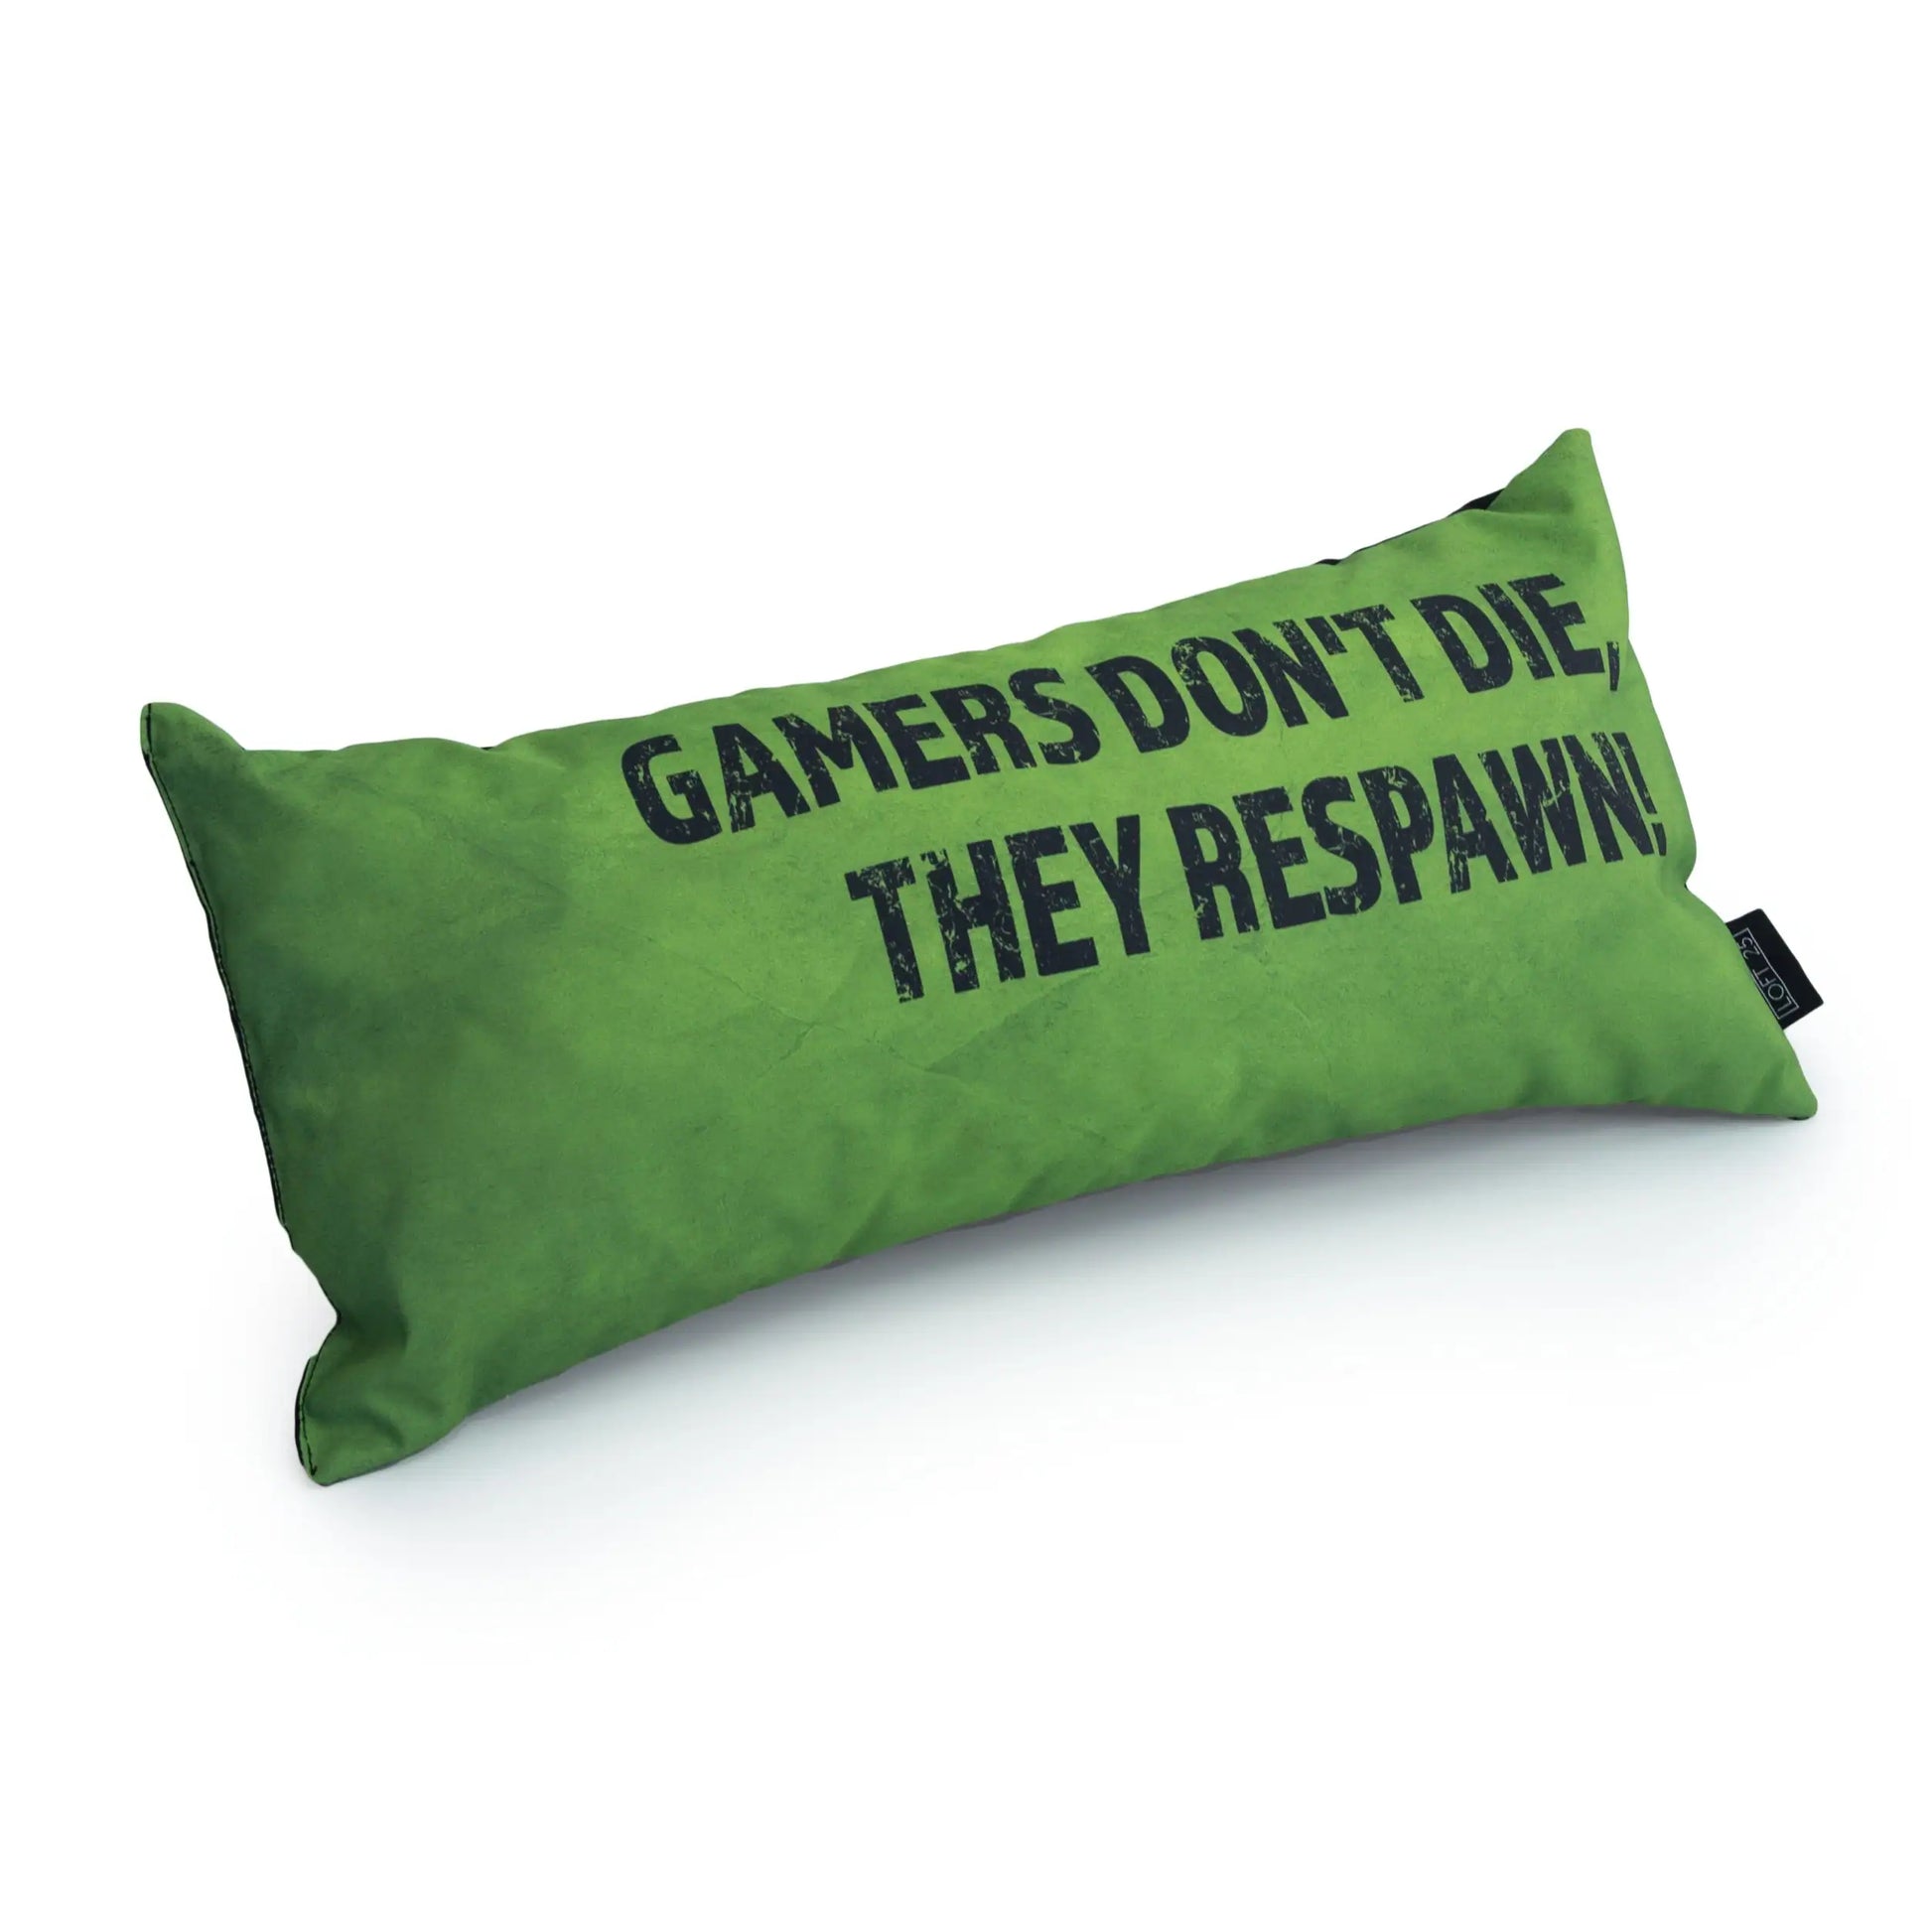 A green pillow with the text "GAMERS DON'T PIE THEY RESPAWN" written on it in white letters.